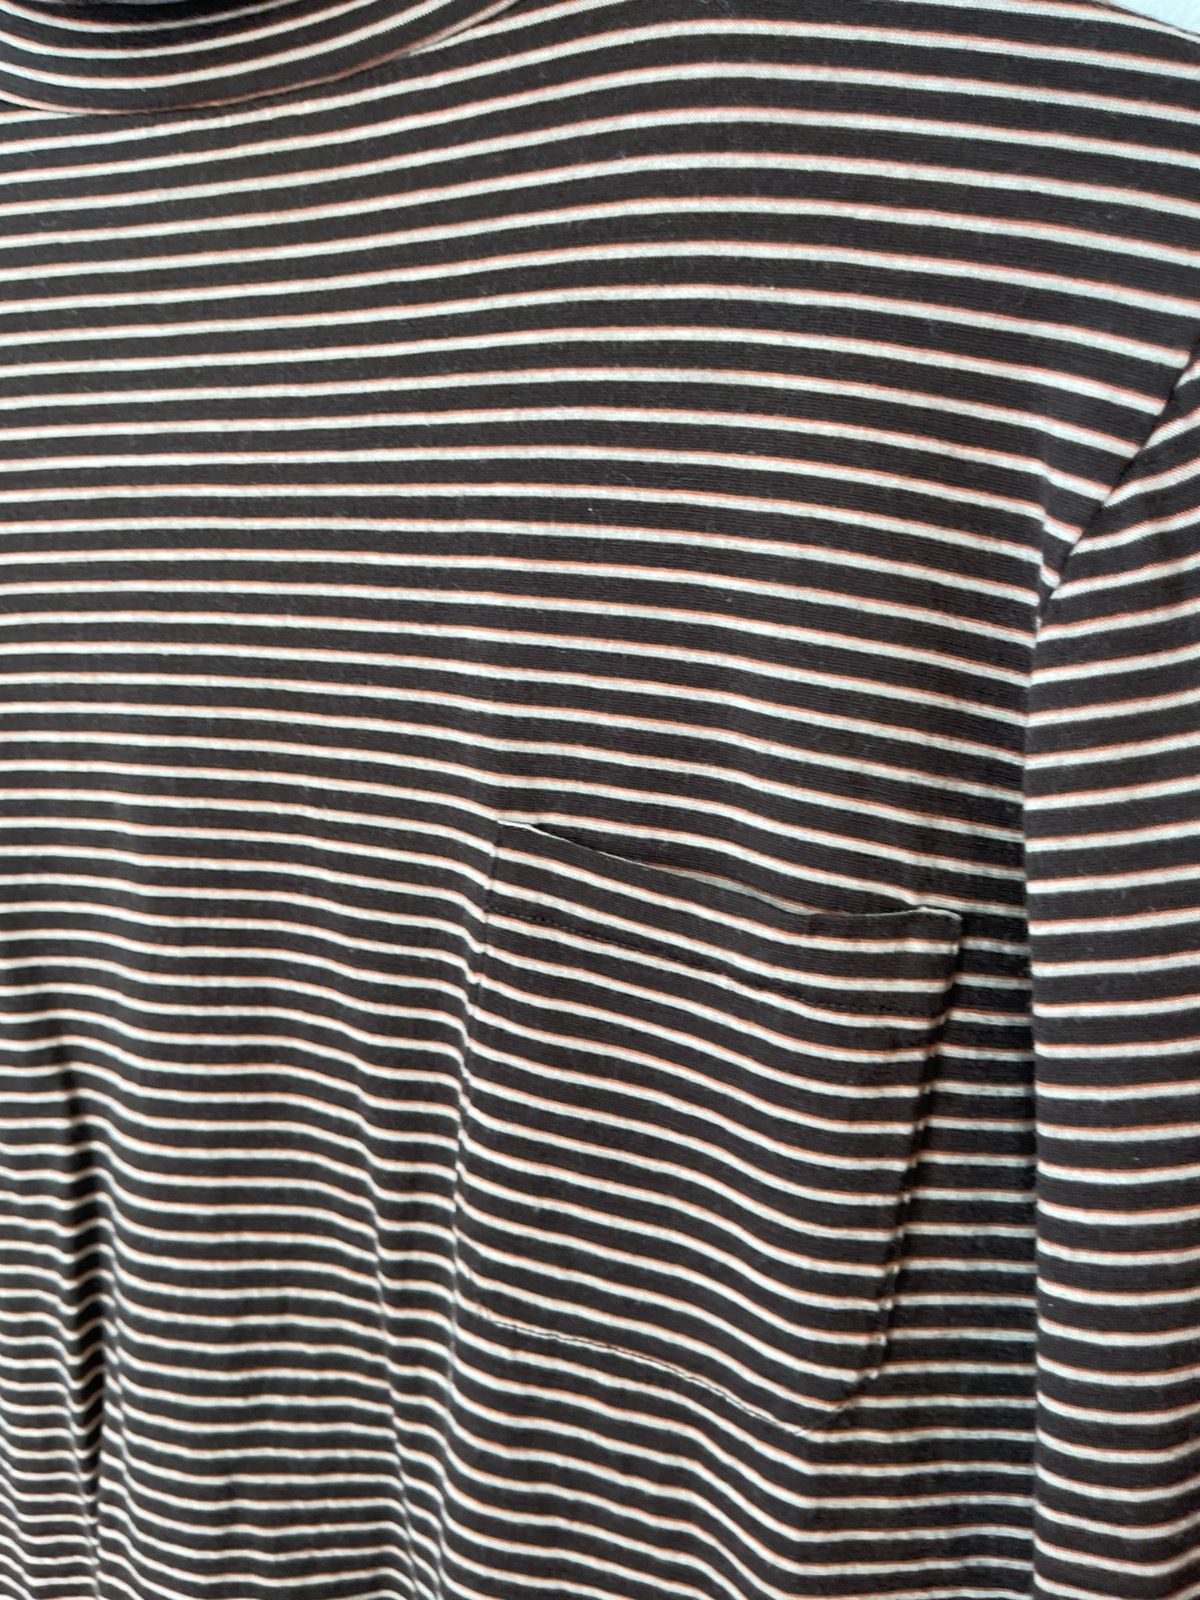 Dior Homme Hedi 05 Striped Thin Turtleneck Shirt XS or S